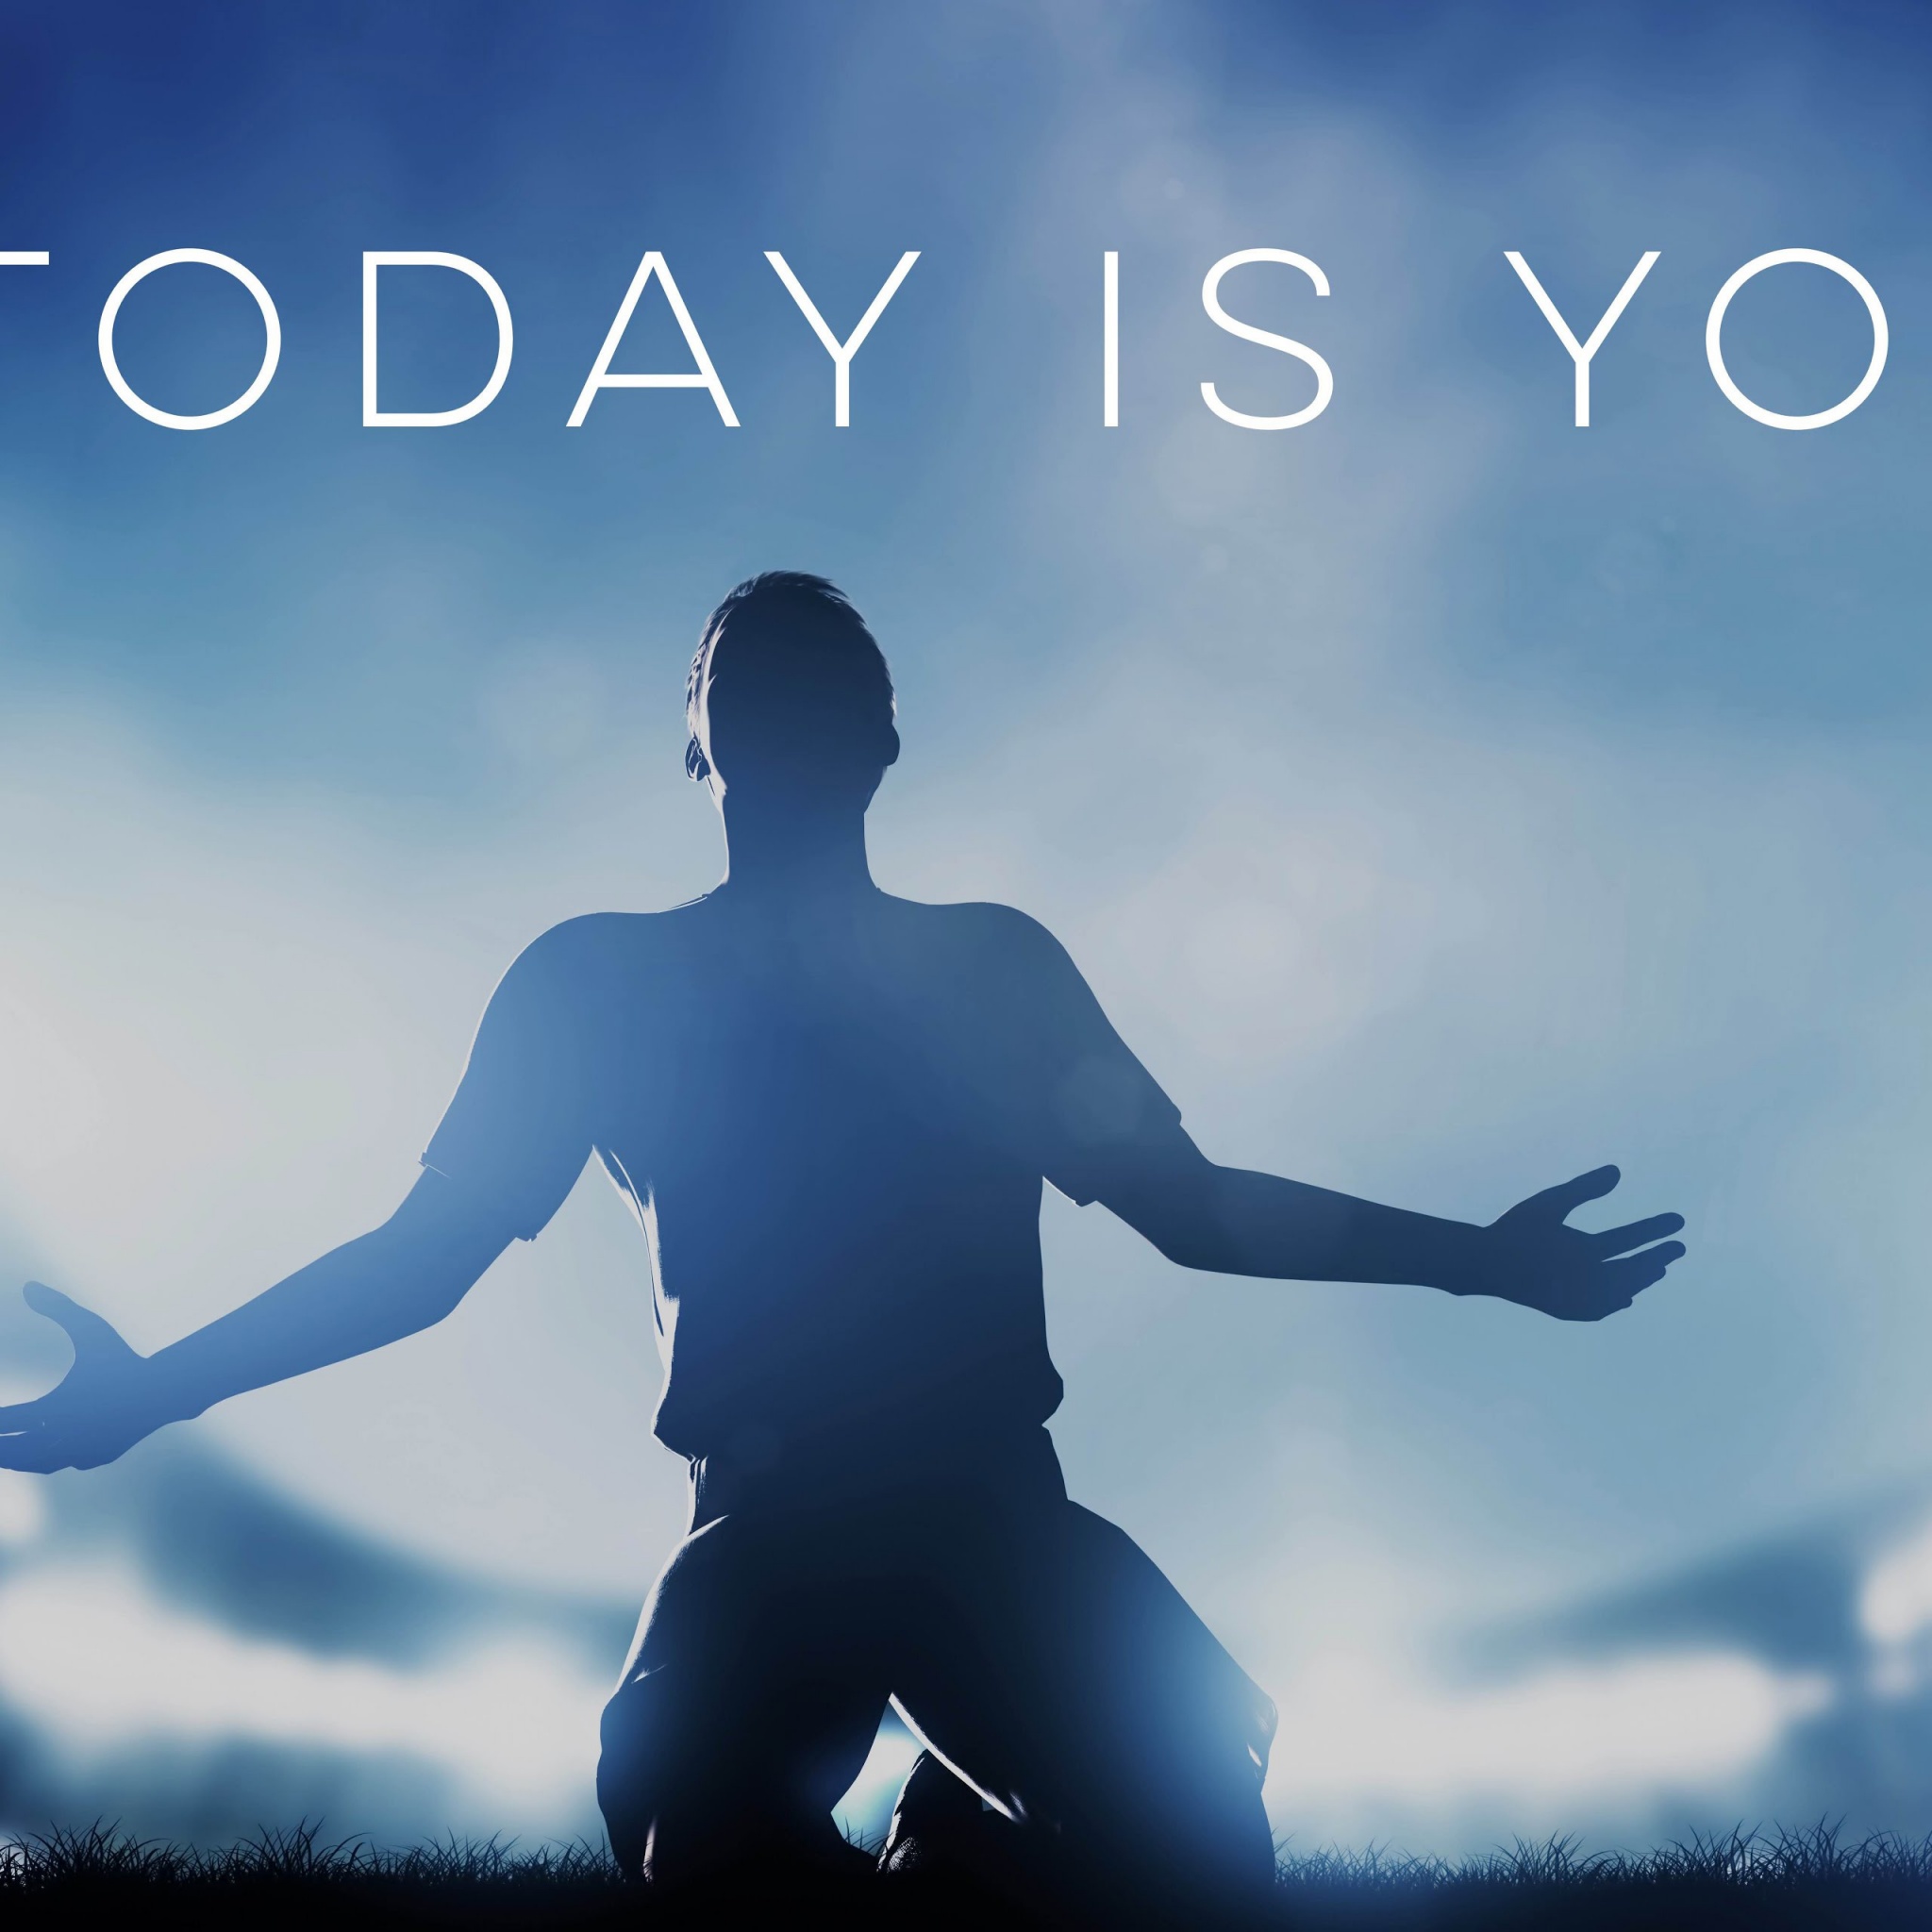 Today is Yours Wallpaper 4K, Inspirational quotes, Quotes, #2011